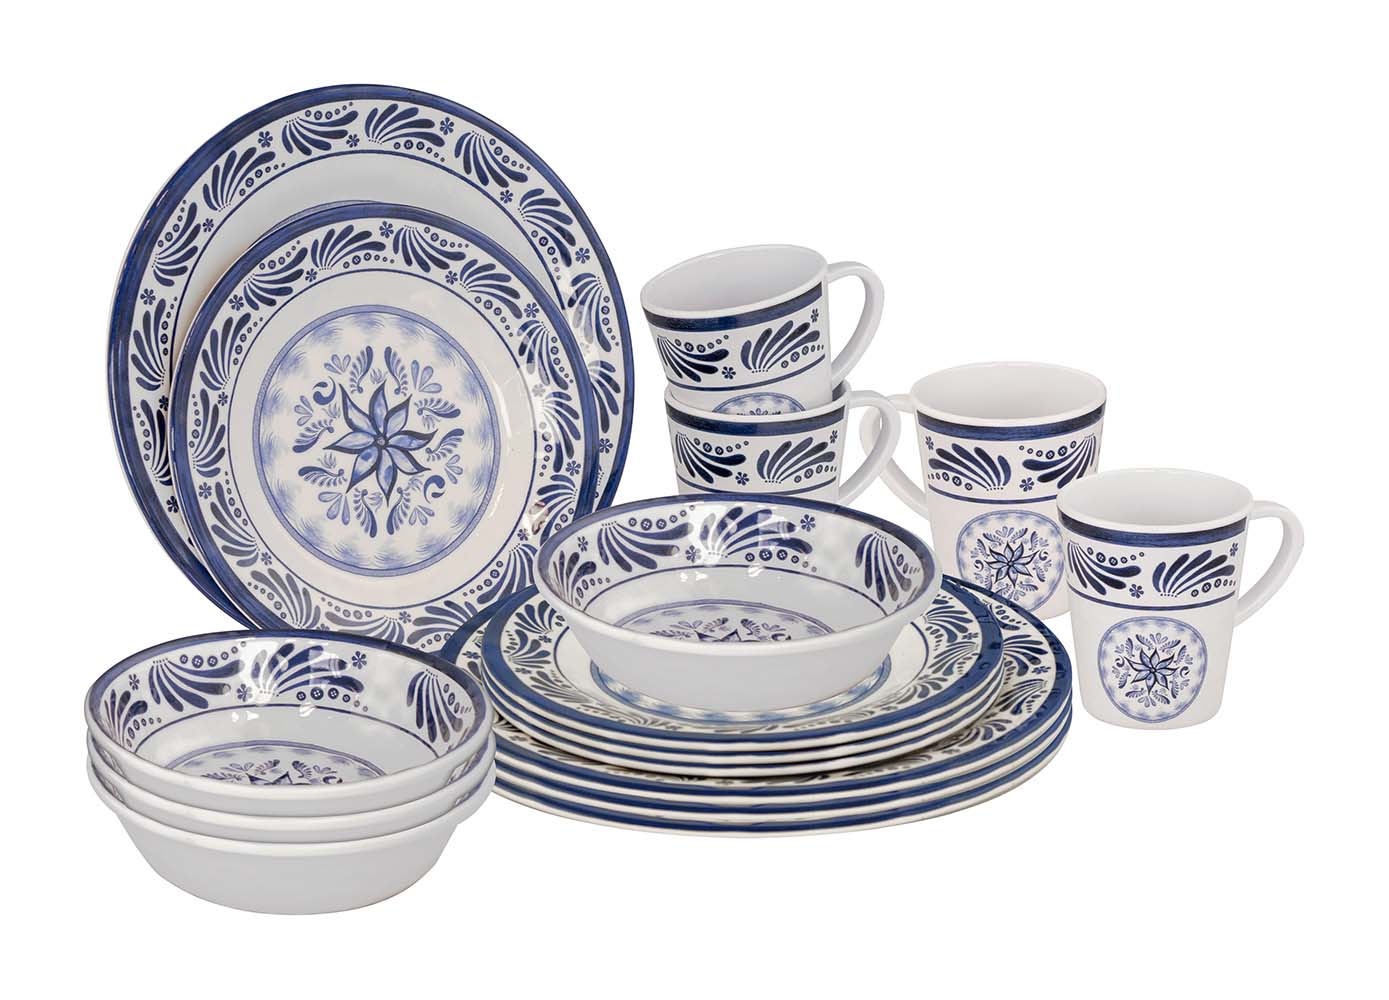 6181360 A luxurious and trendy 16-piece tableware set made of 100% melamine. The tableware set has an old Dutch design with a new look. The melamine dinnerware is virtually unbreakable and very lightweight. In addition, the set is scratch resistant and dishwasher safe. This stylish set is suitable for 4 people and consists of 4 breakfast plates, 4 dinner plates, 4 bowls and 4 mugs.